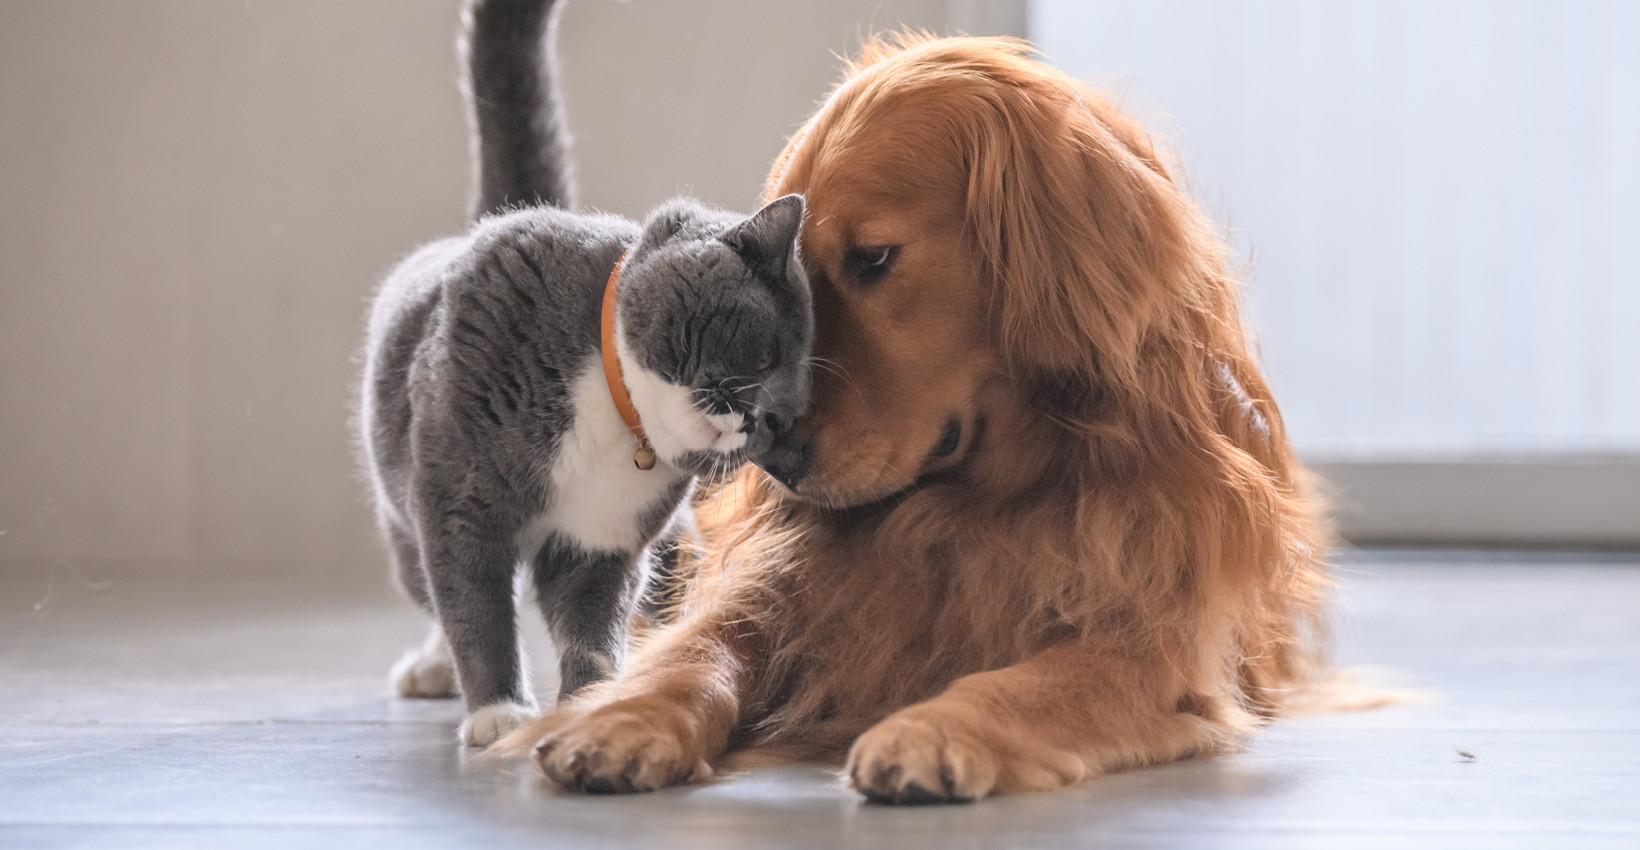 A cat and dog giving each other some love. 